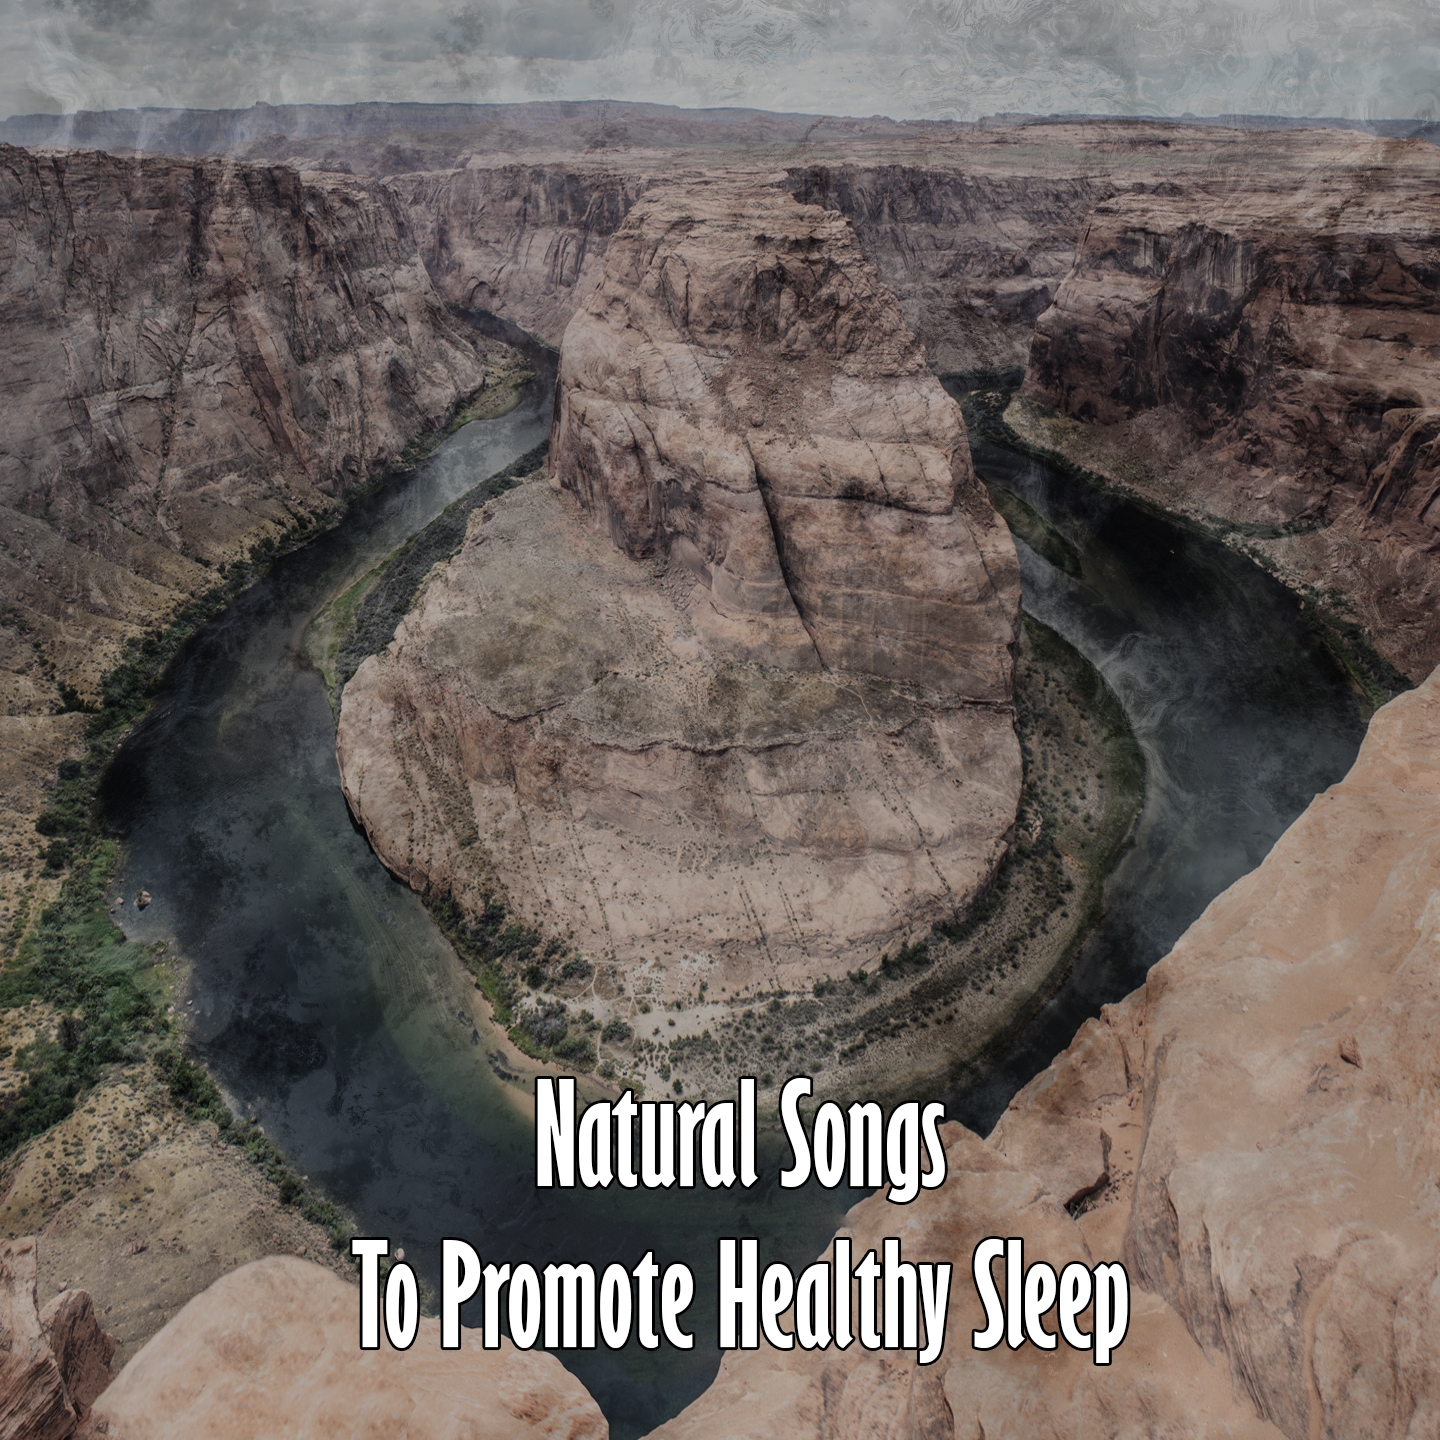 Natural Songs To Promote Healthy Sleep